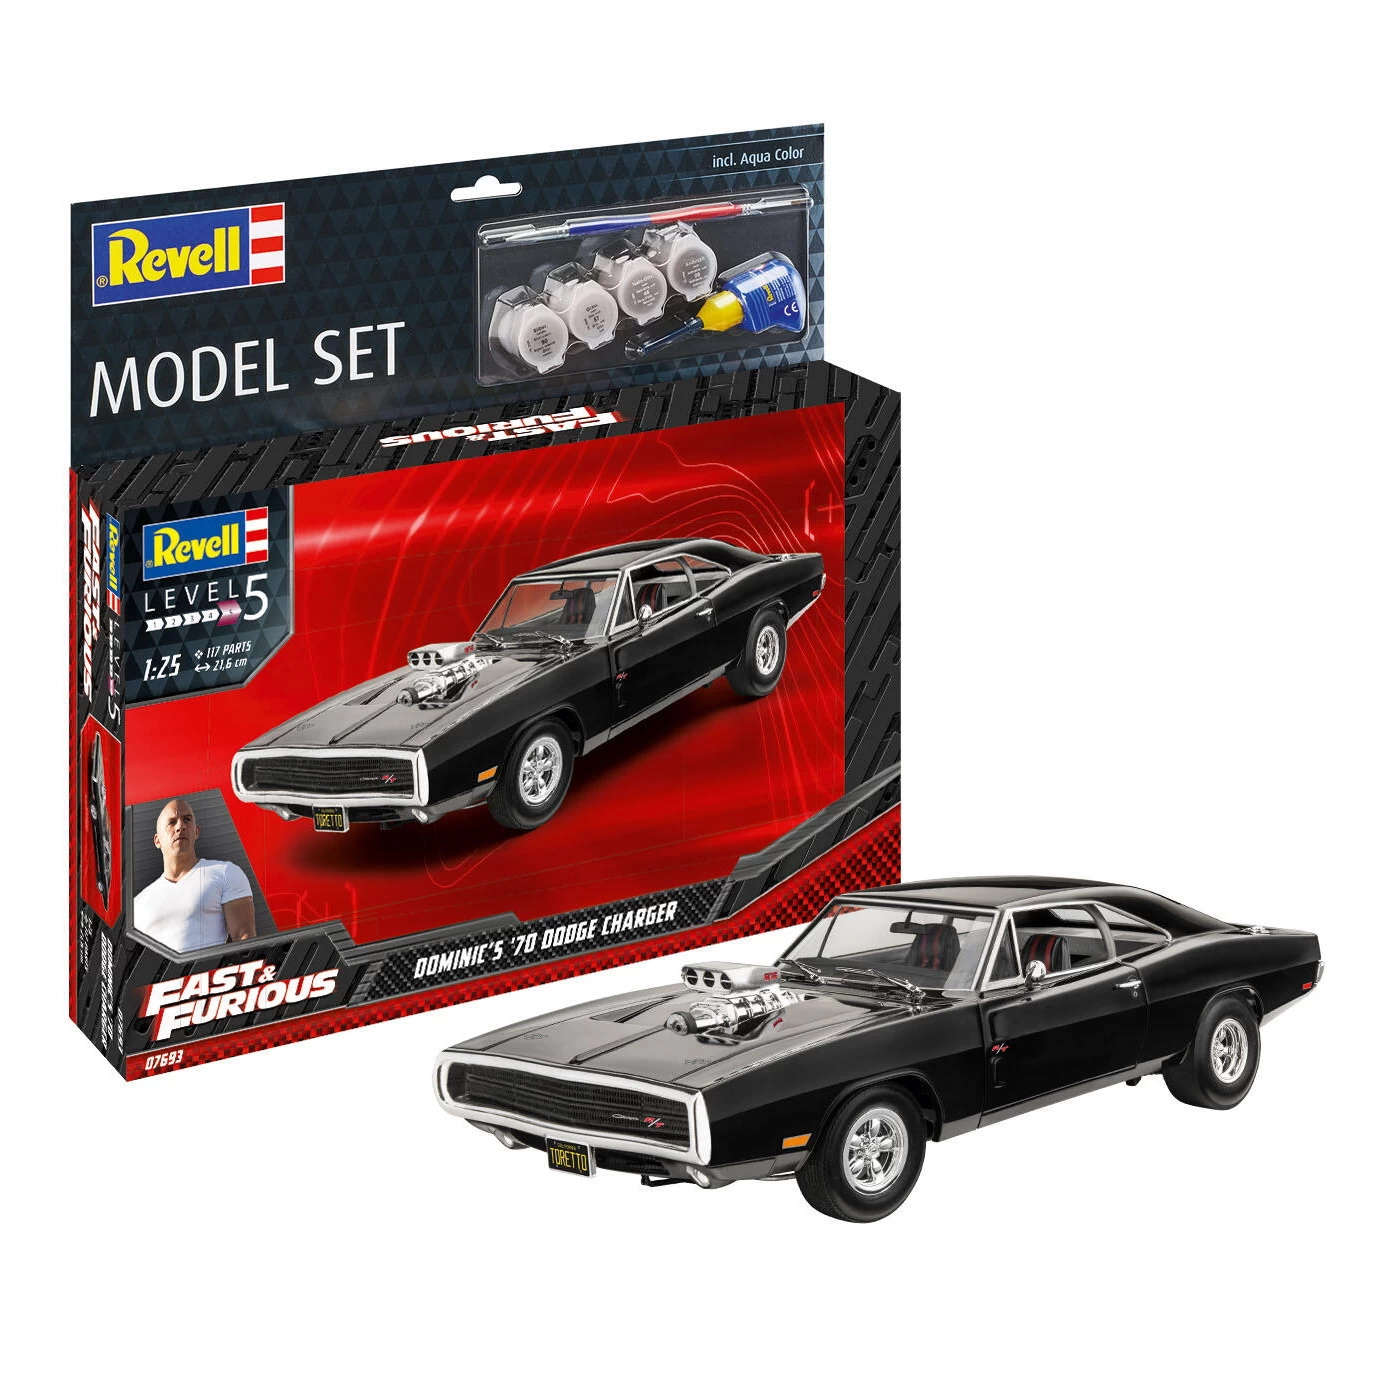 Revell 67693 - Model Set Fast & Furious - Dominics 1970 Dodge Charger